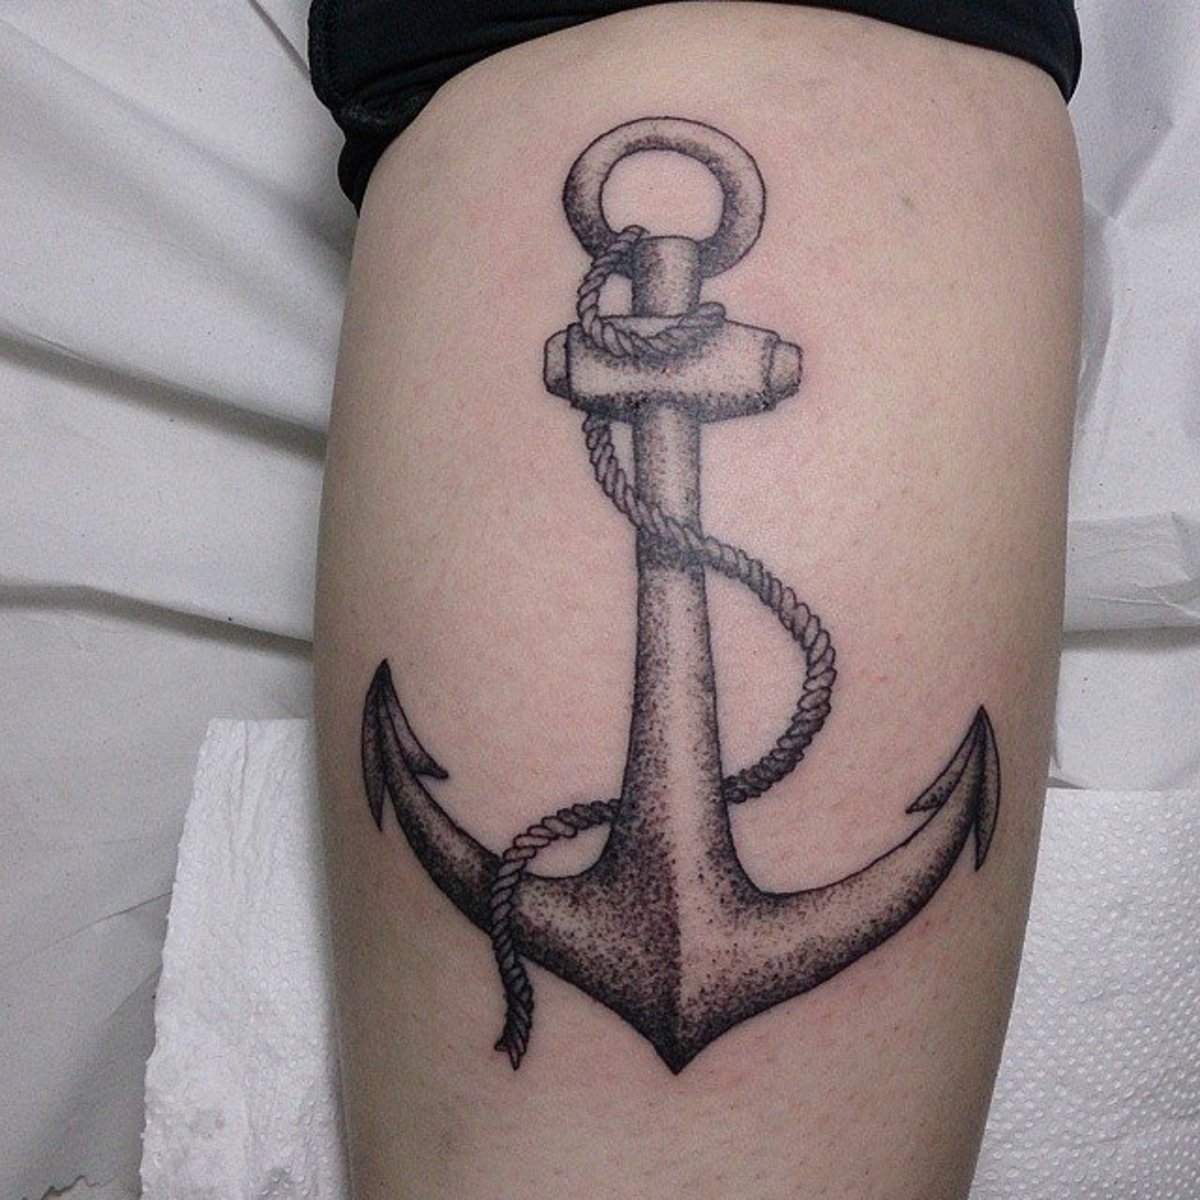 Anchor Tattoos: Designs, Meanings, and Other Ideas